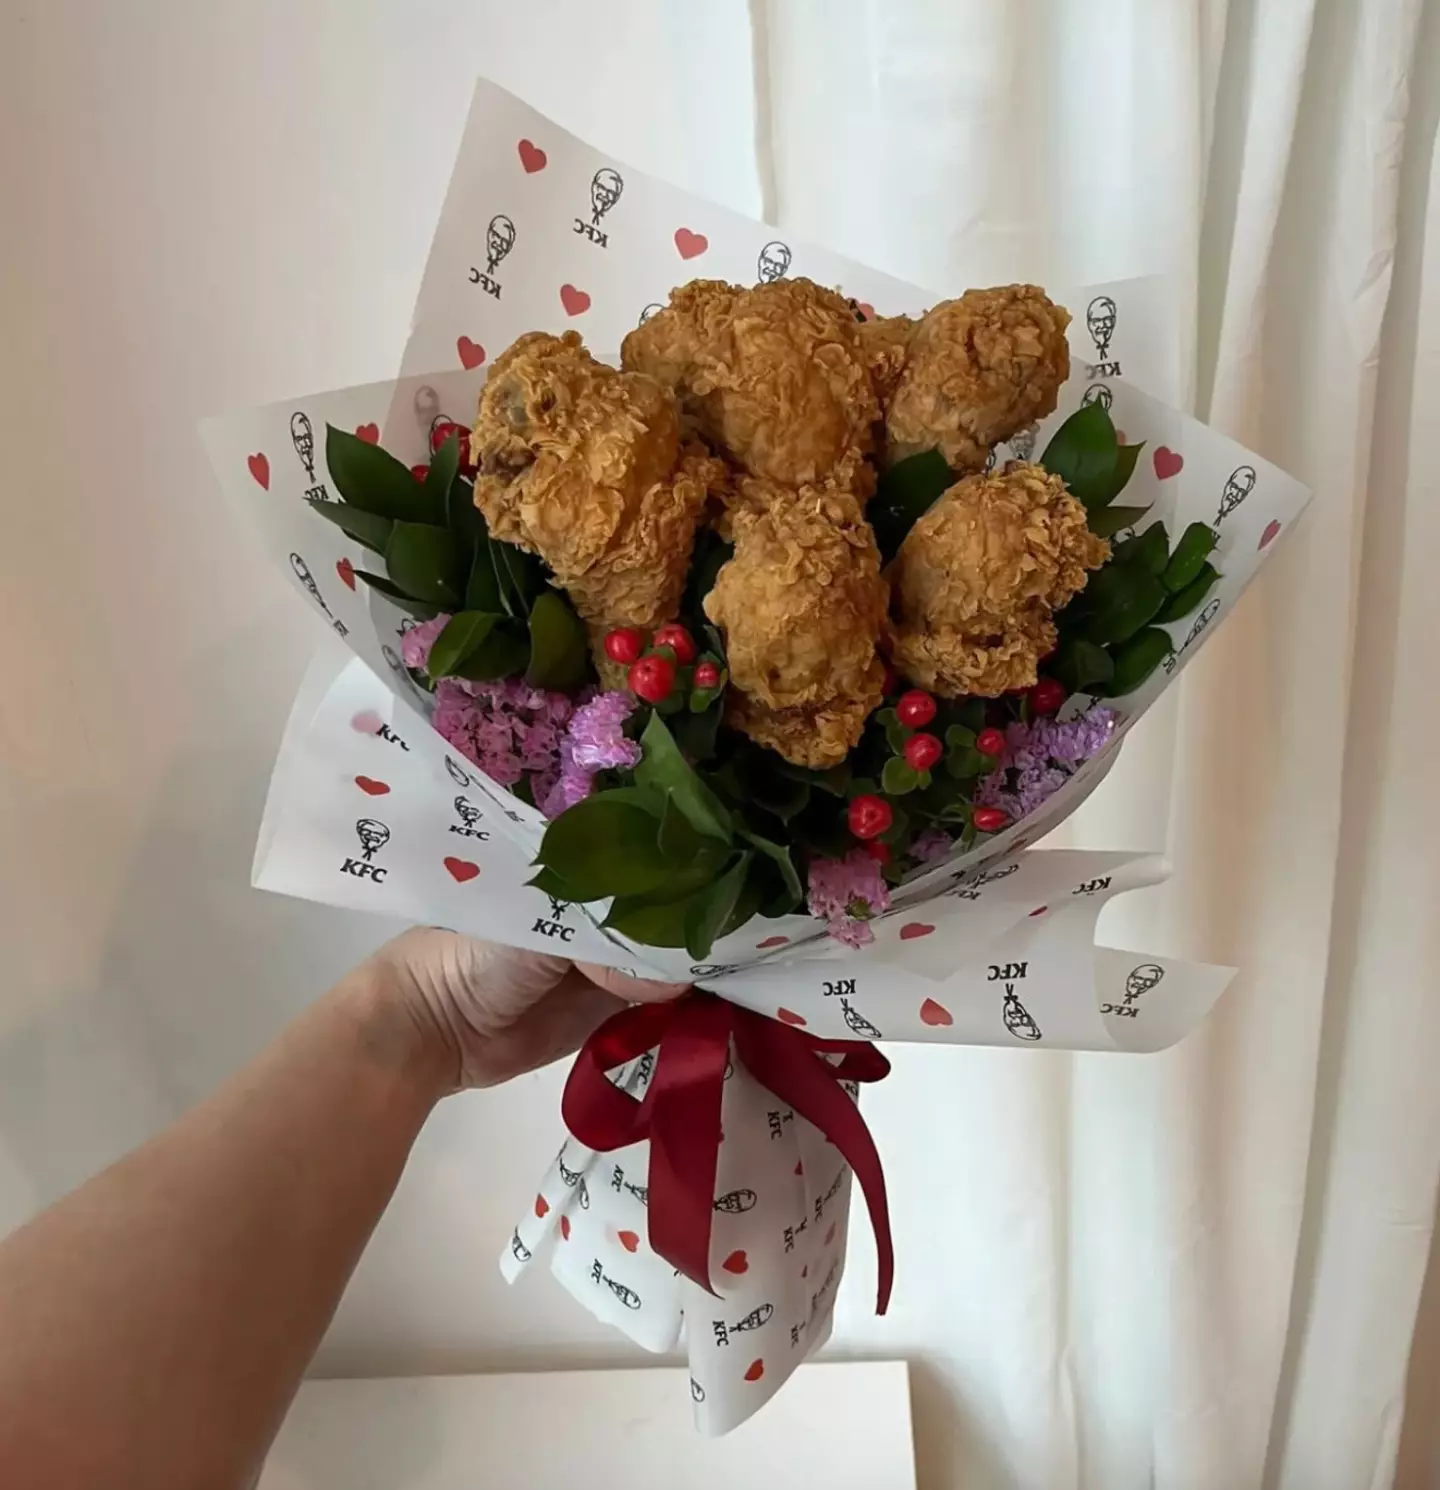 The famed chicken bouquet.